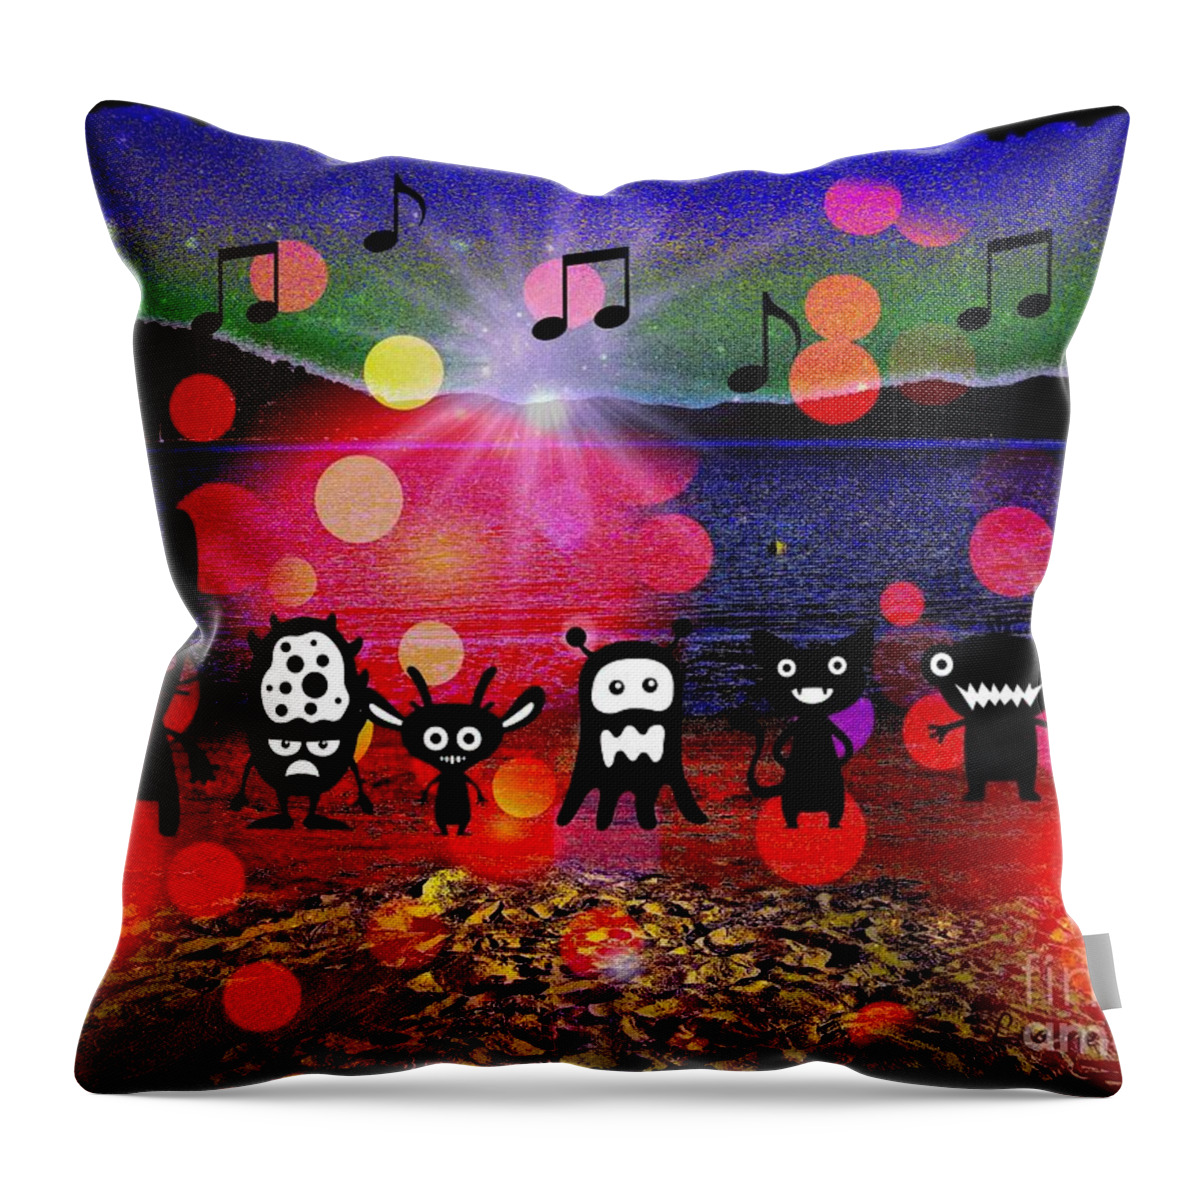 Fun Throw Pillow featuring the mixed media Beach Party Critters by Leanne Seymour